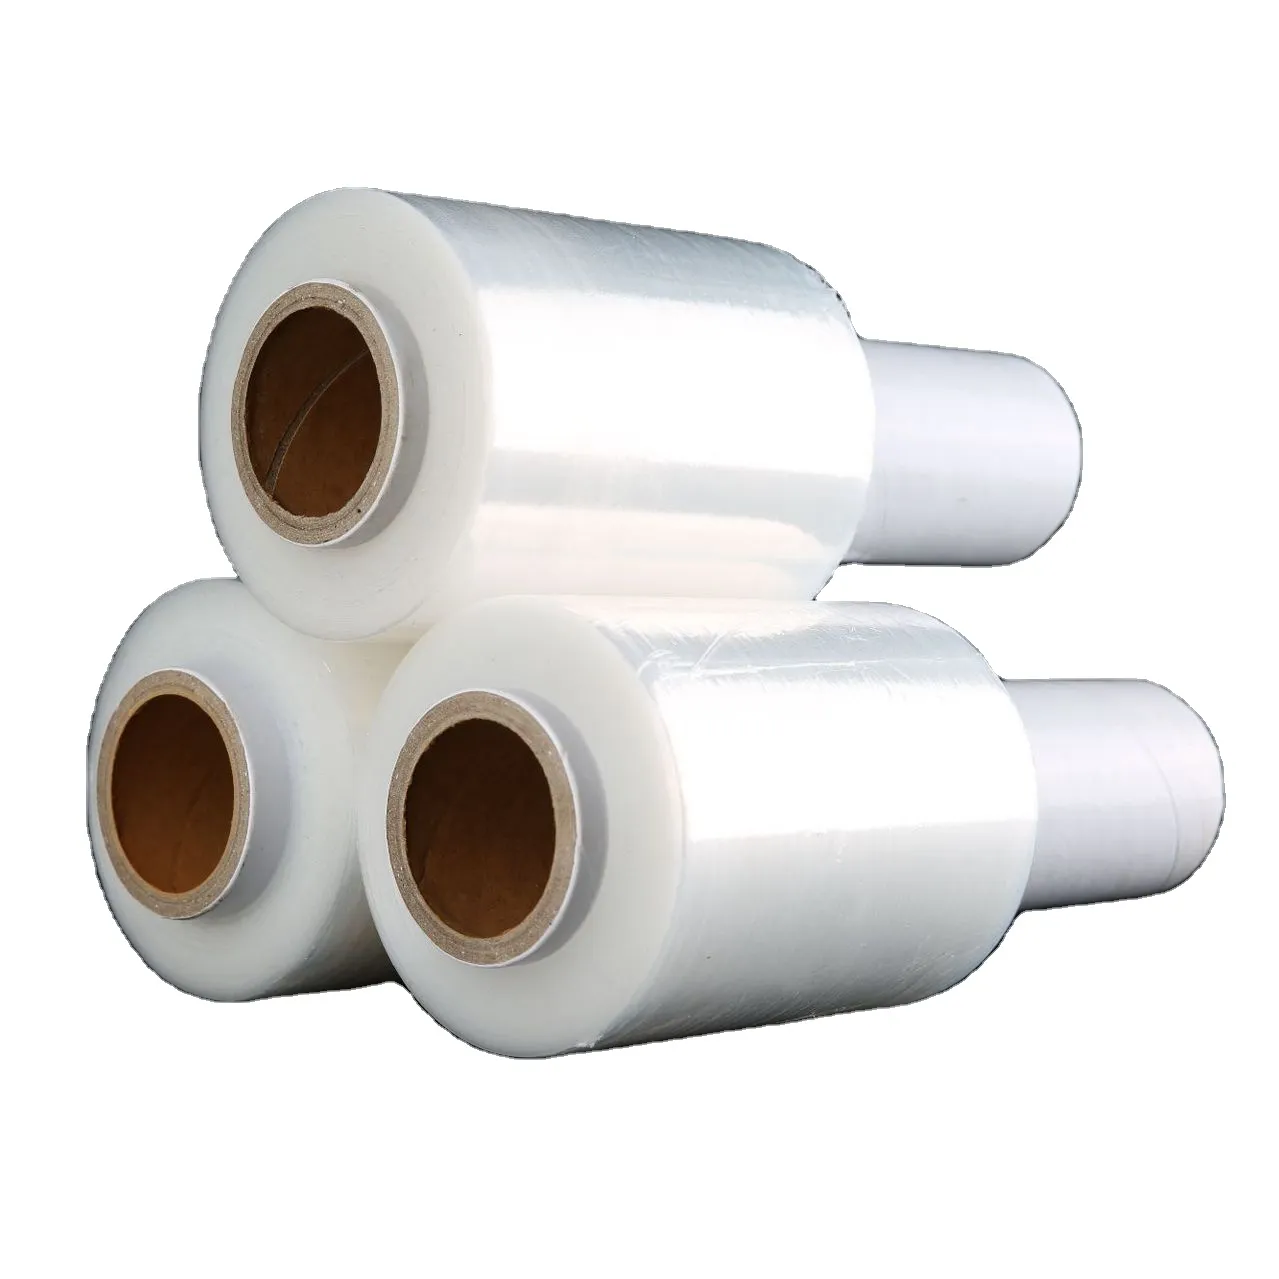 PE hand wrapping film with handle soft packaging film PE stretch film